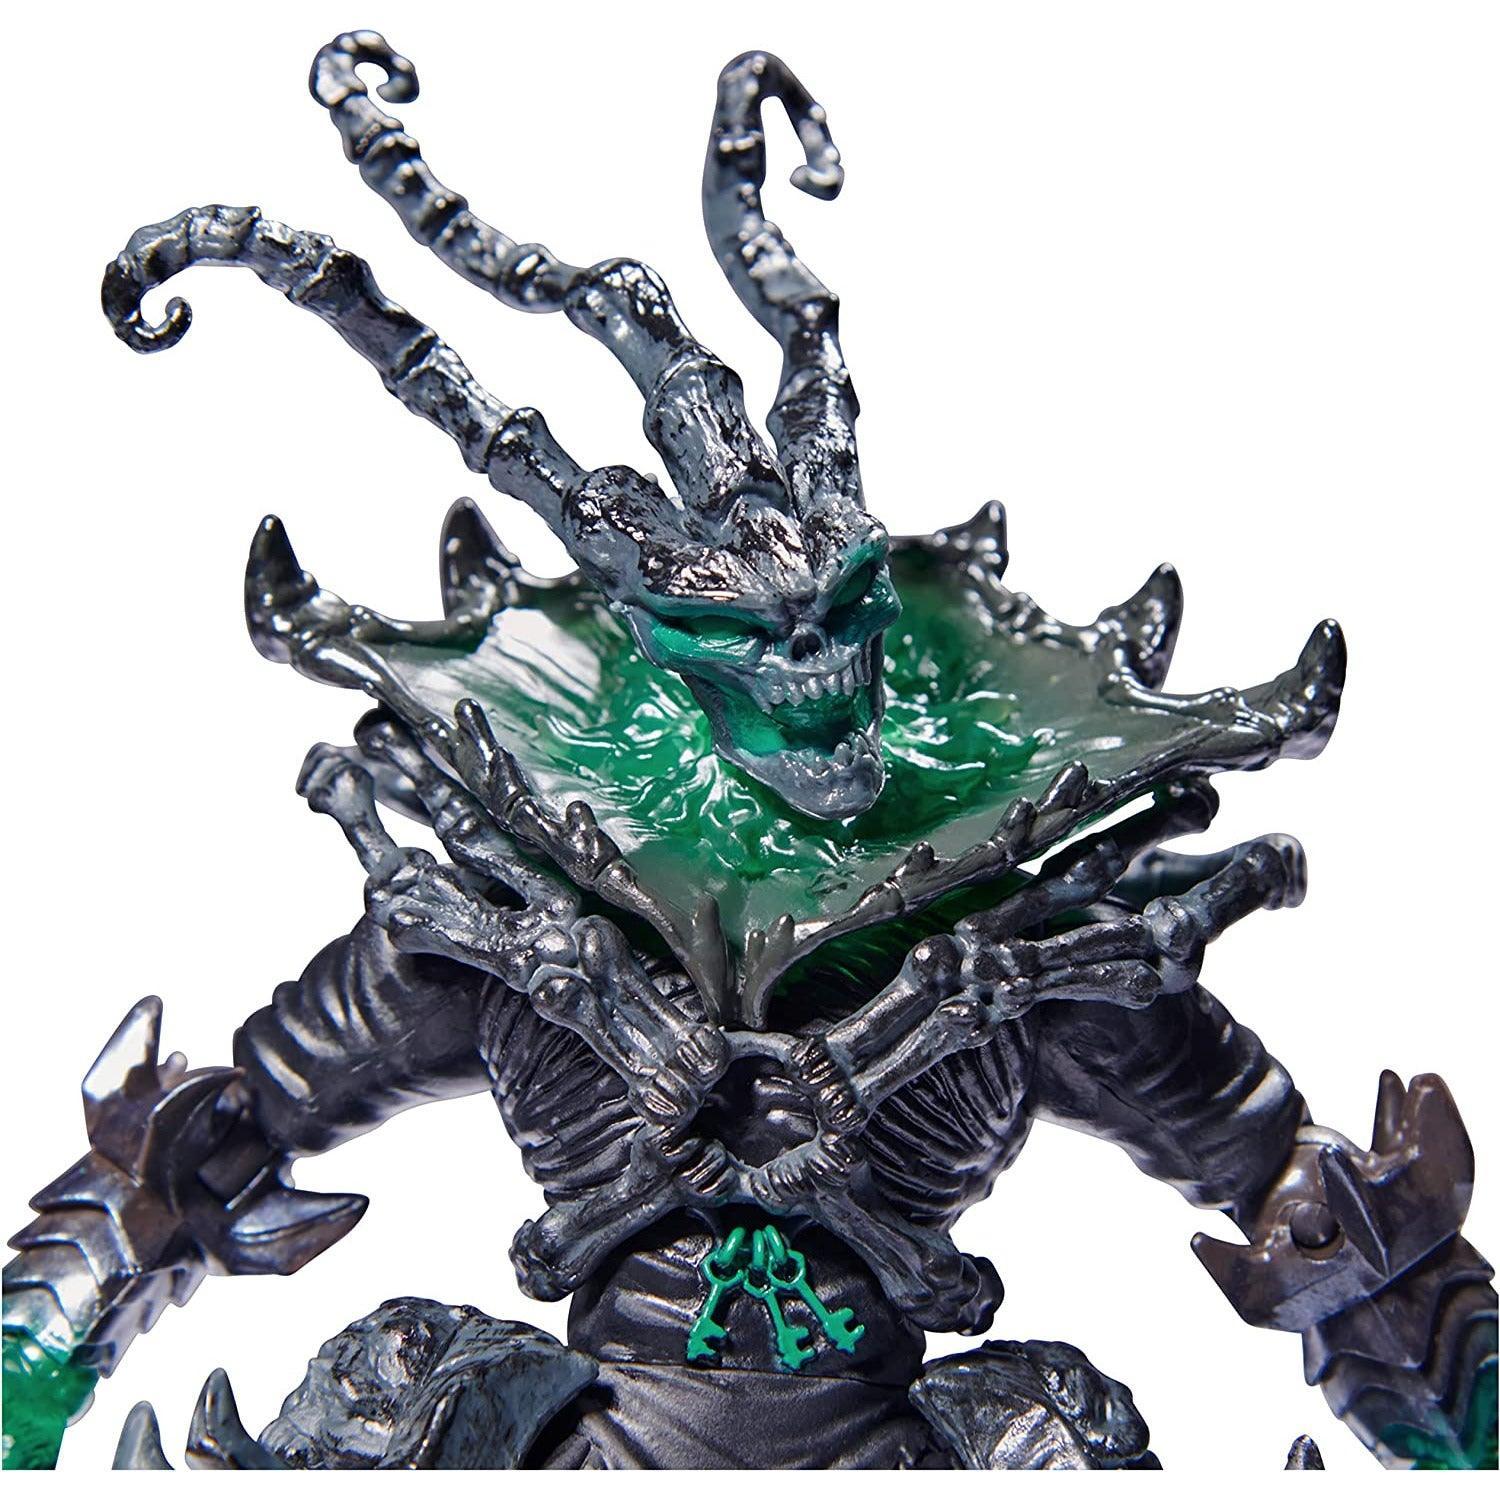 League of Legends, 6-Inch Thresh Collectible Figure w/ Premium Details and 2 Accessories - BumbleToys - 5-7 Years, Boys, Figures, Heroes, LEAGUE OF LEGENDS, Pre-Order